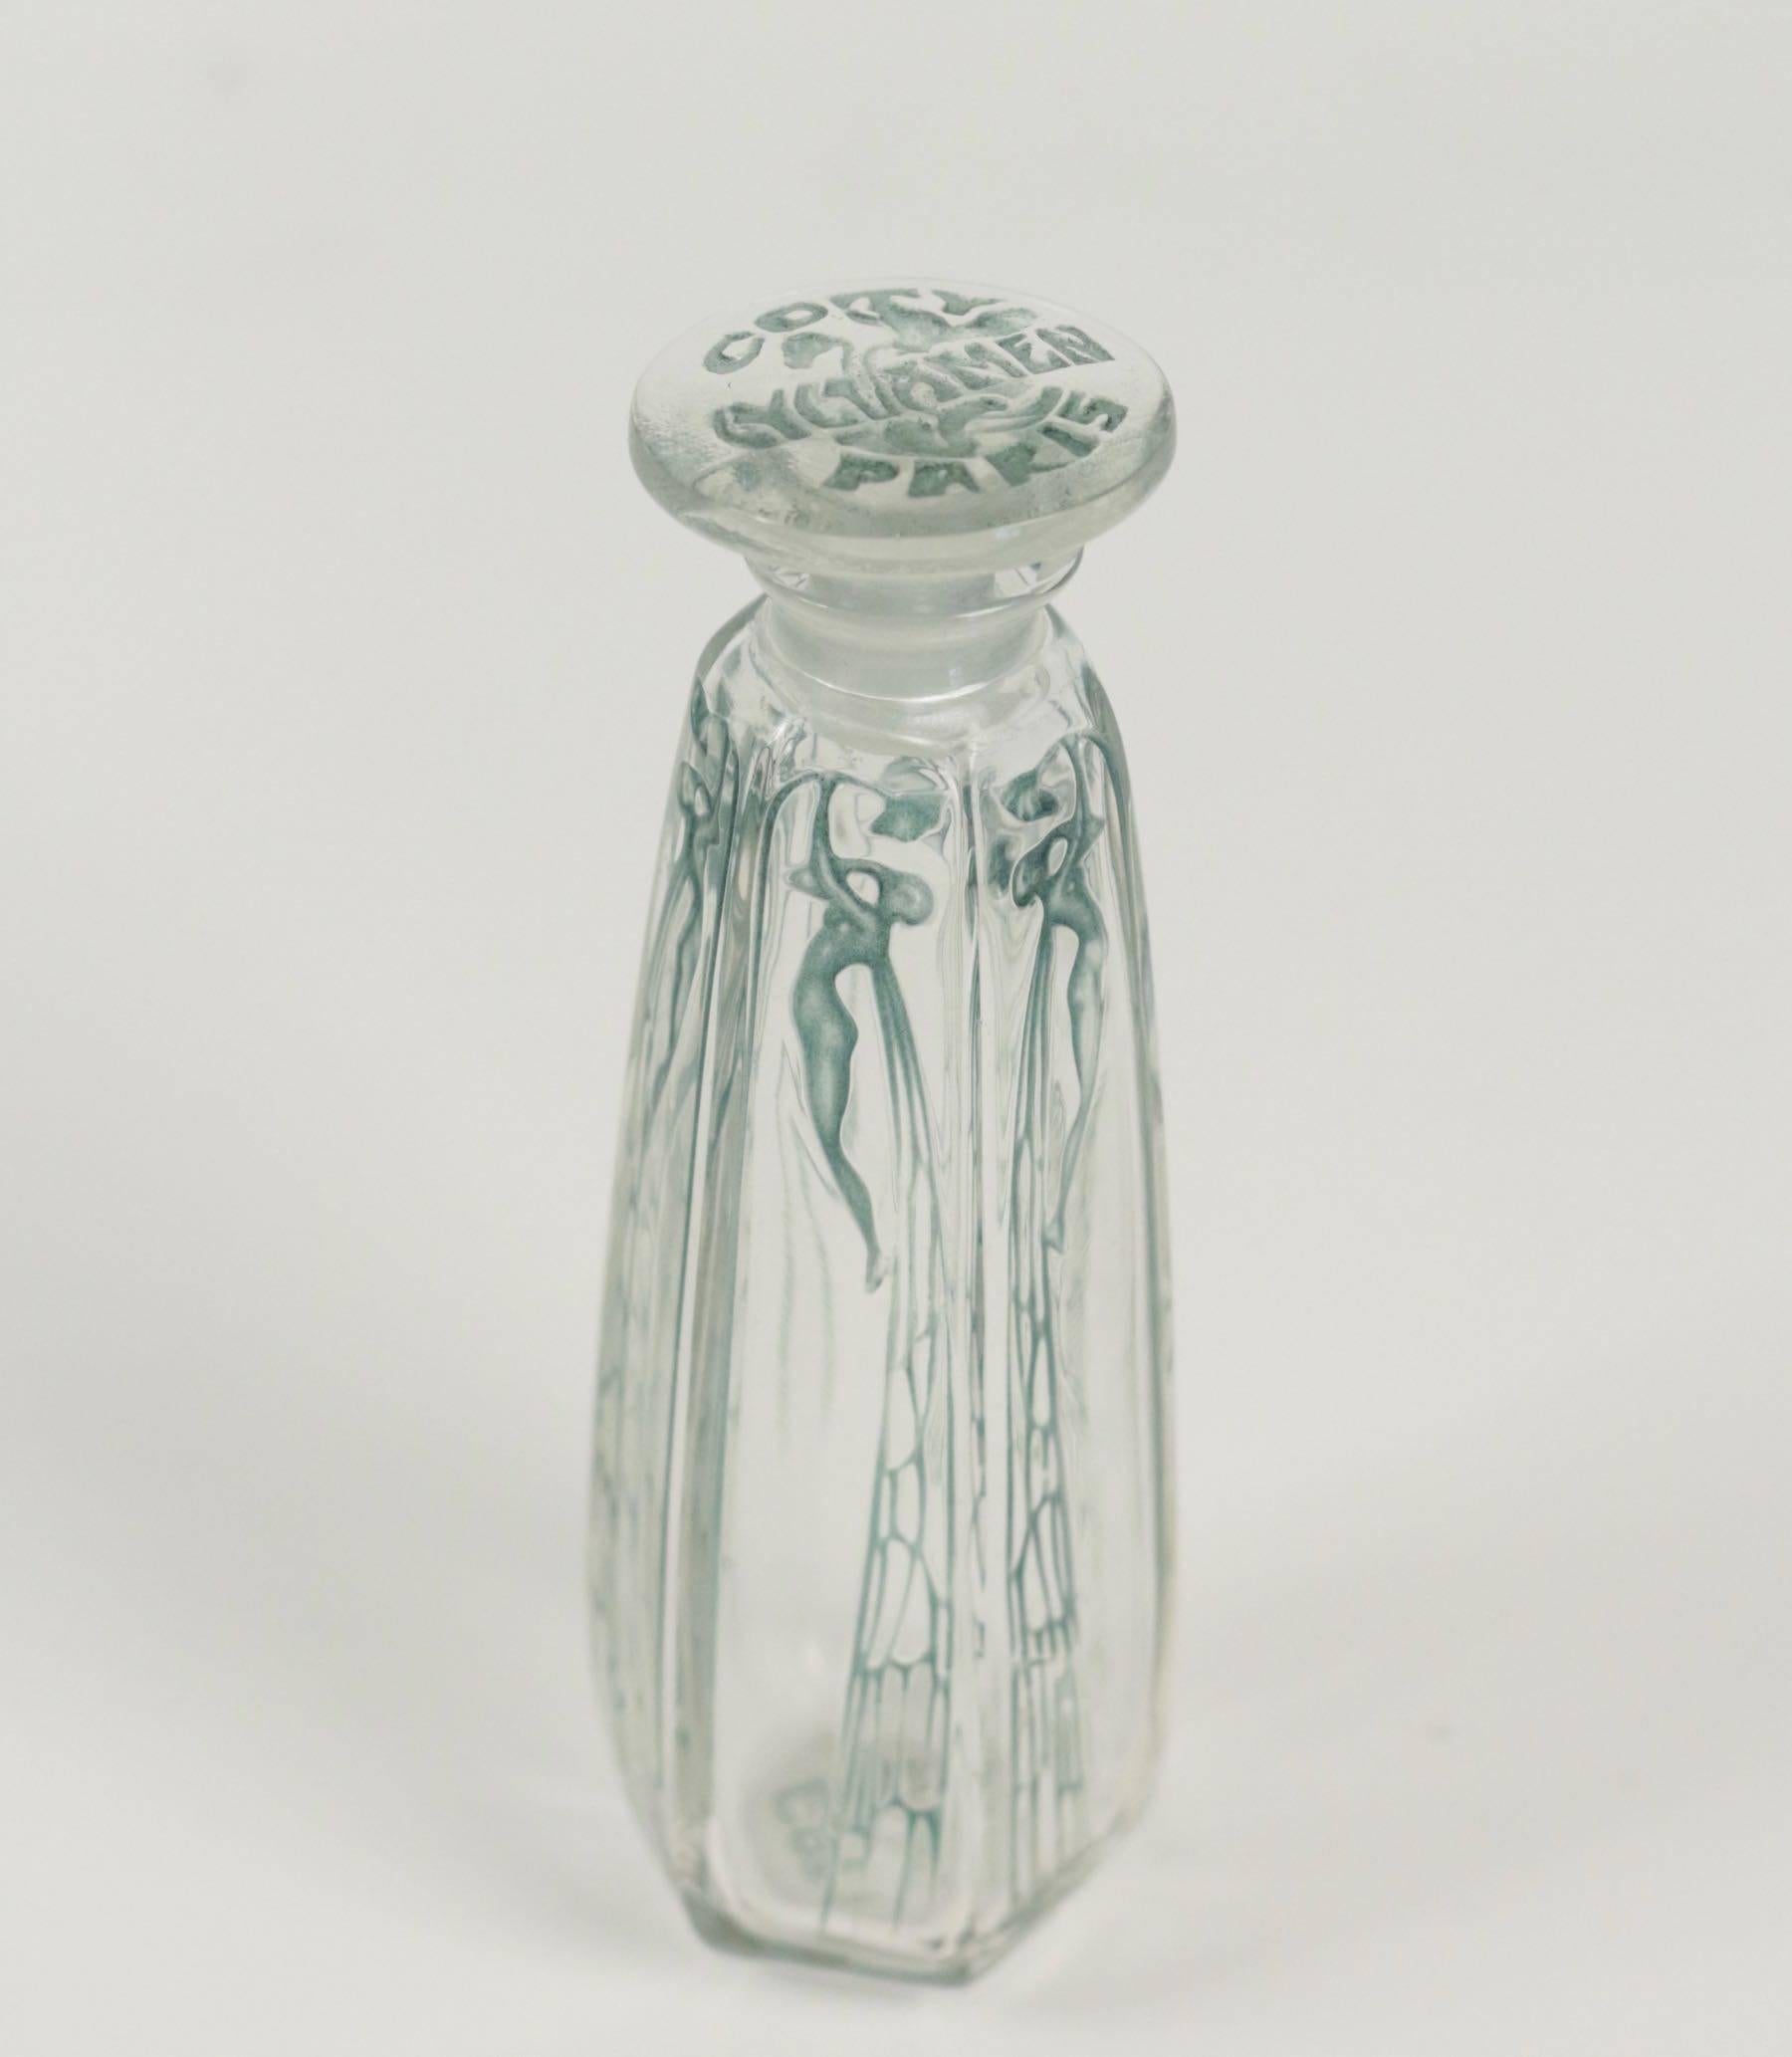 13.5 cm tall.
 Clear glass with a patinated design of frosted winged women R. Lalique Perfume Bottle signed R. Lalique in the mold on a lower receding edge and Coty Paris on the underside.
Rene Lalique Coty.

Cyclamen Flacon en verre-soufflé